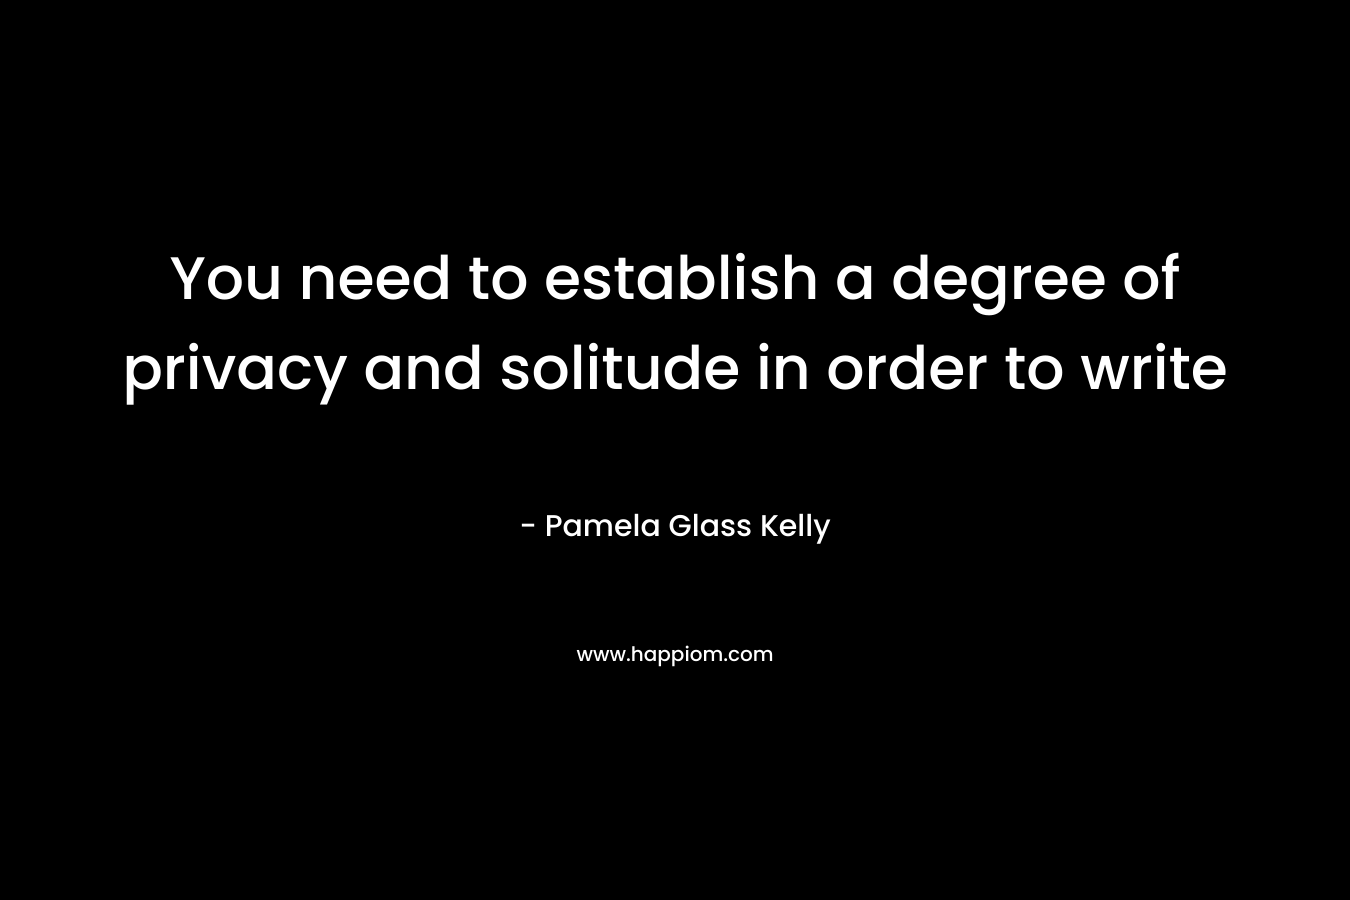 You need to establish a degree of privacy and solitude in order to write – Pamela Glass Kelly